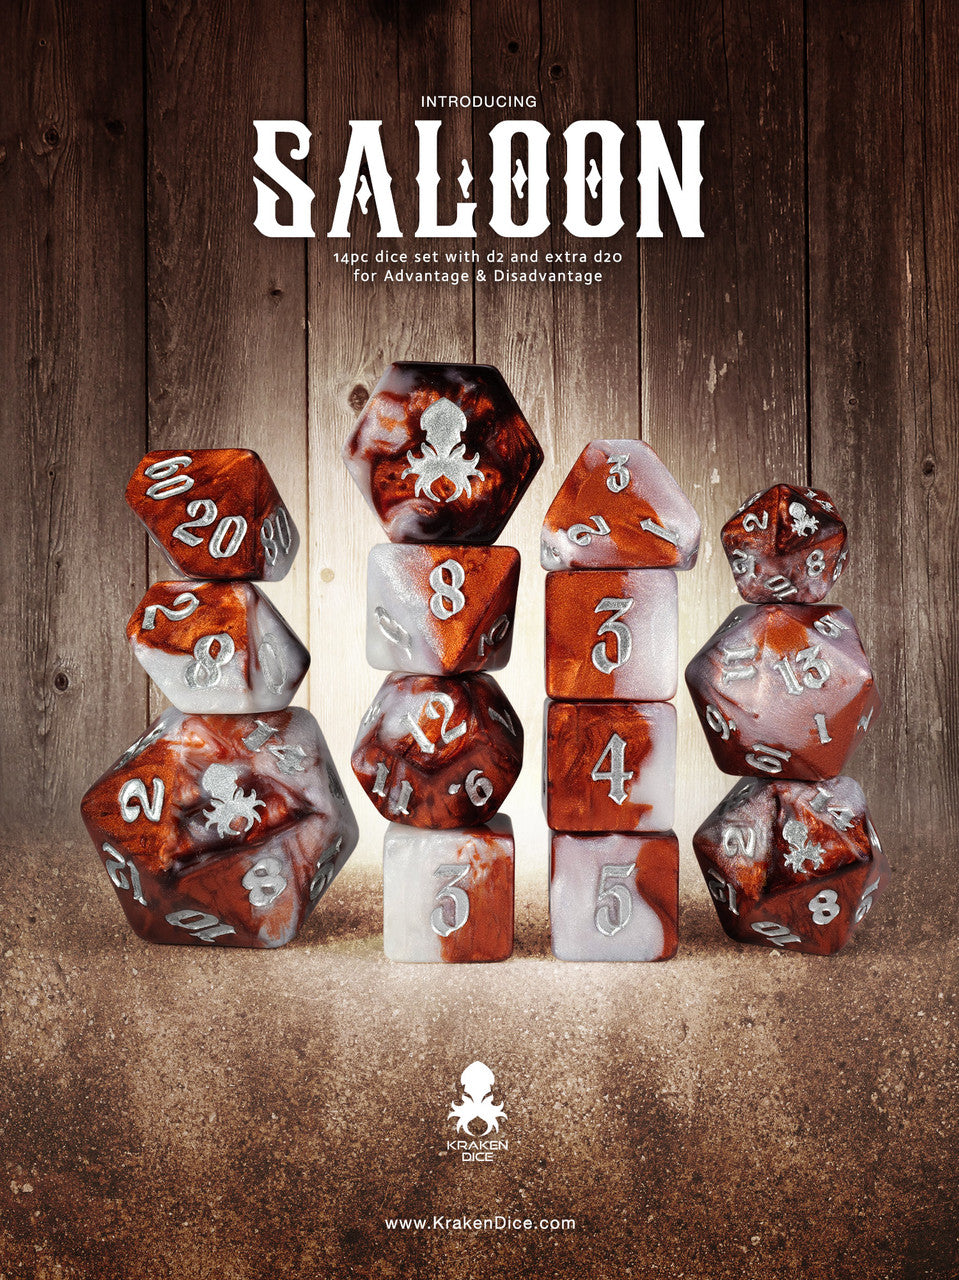 Saloon 14pc Dice Set inked in Silver